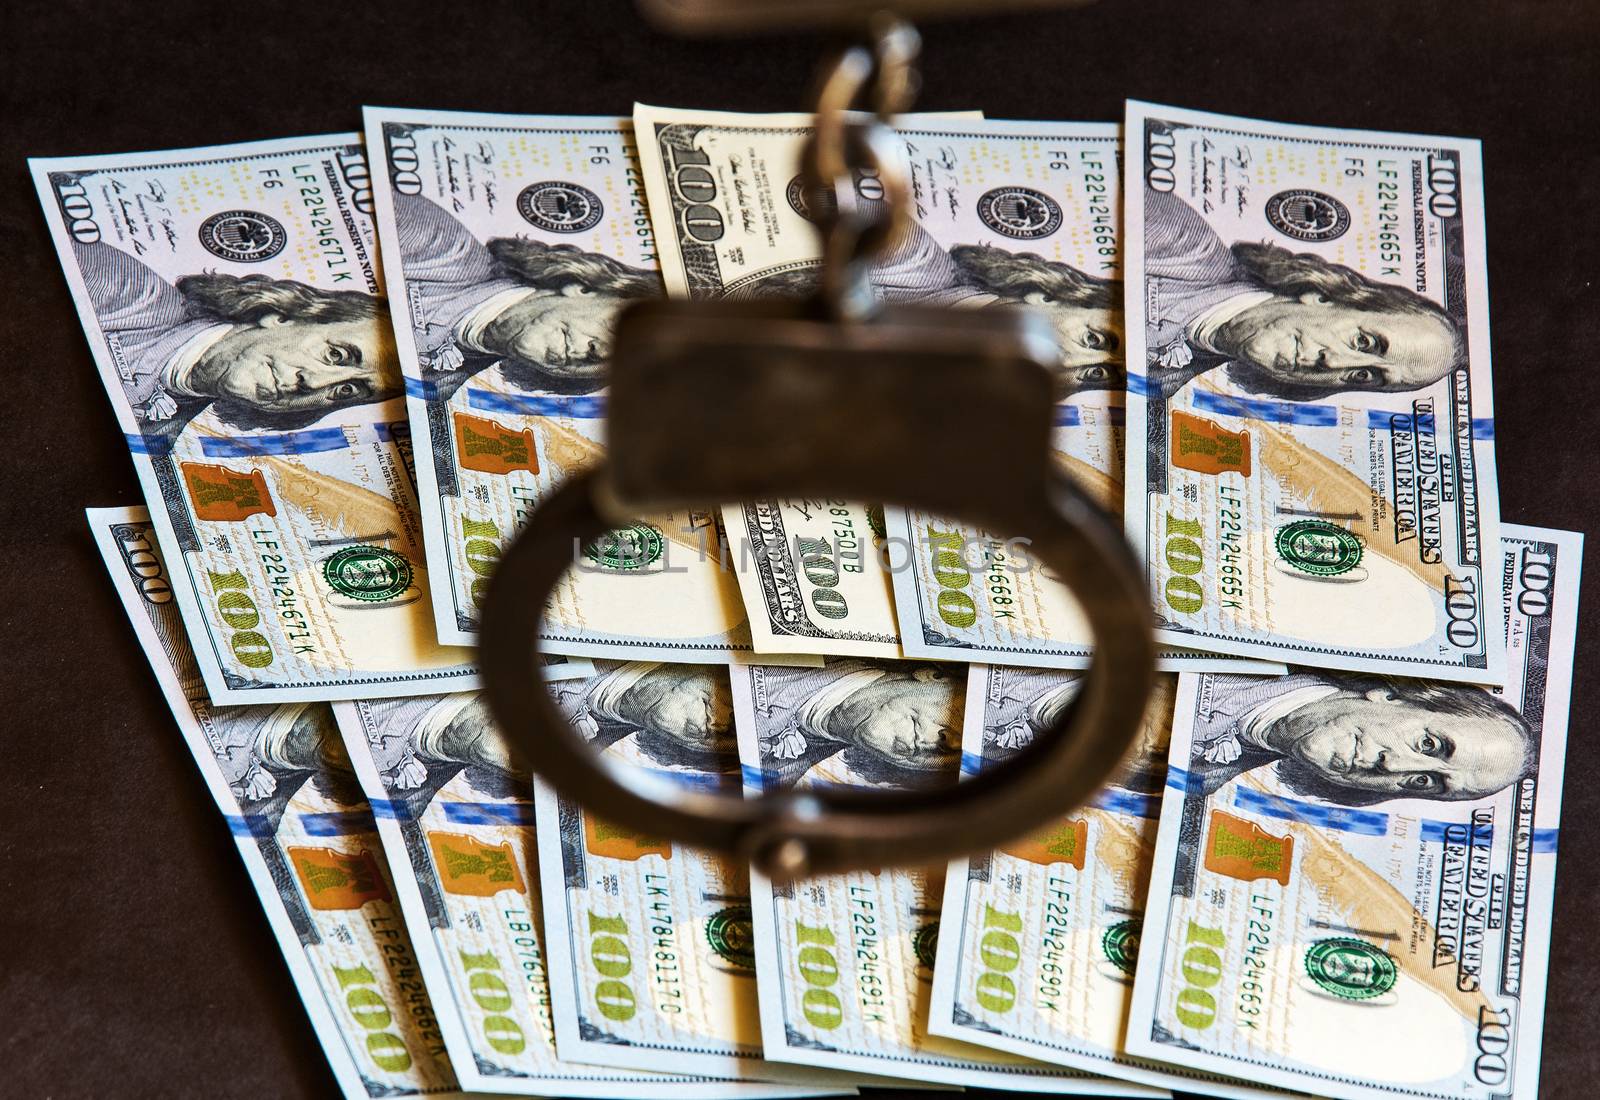 Handcuffs on one hundred banknotes of US dollars